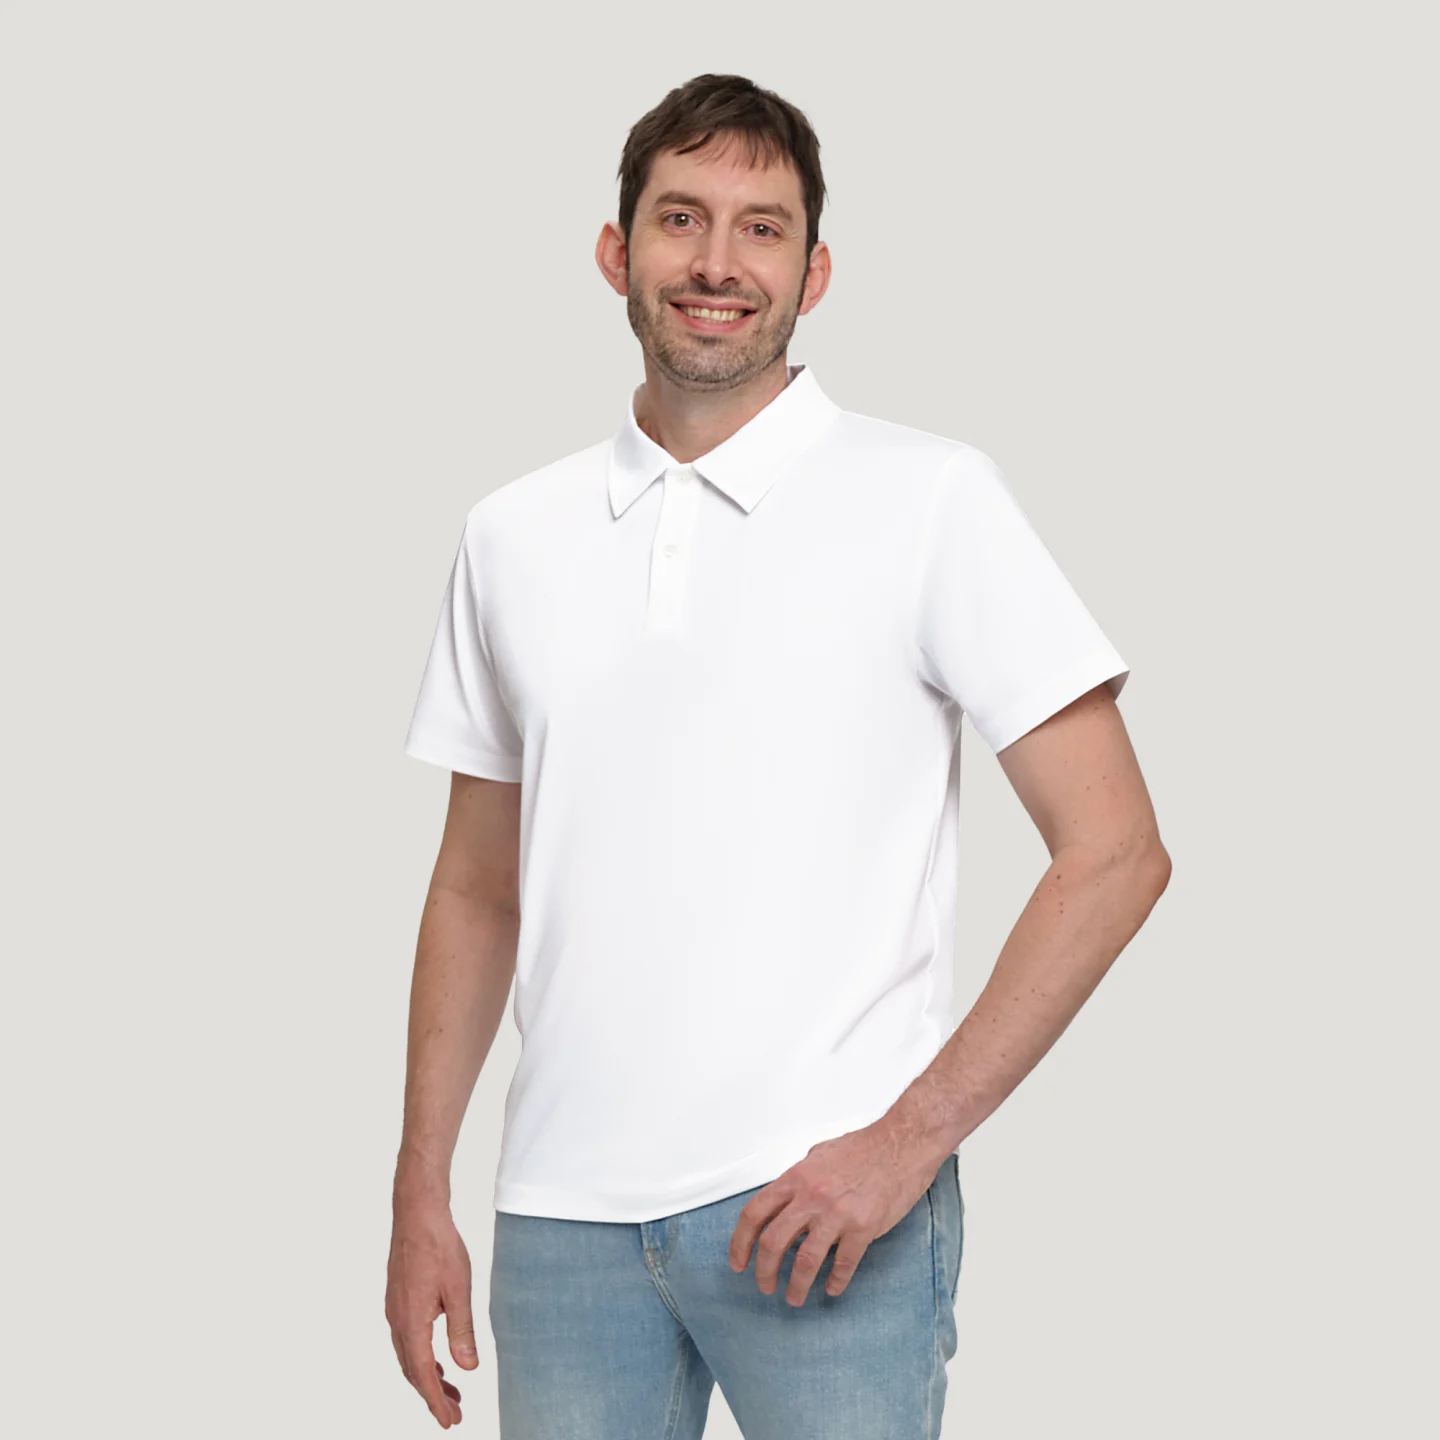 Men's Classic Fit Polo Shirts